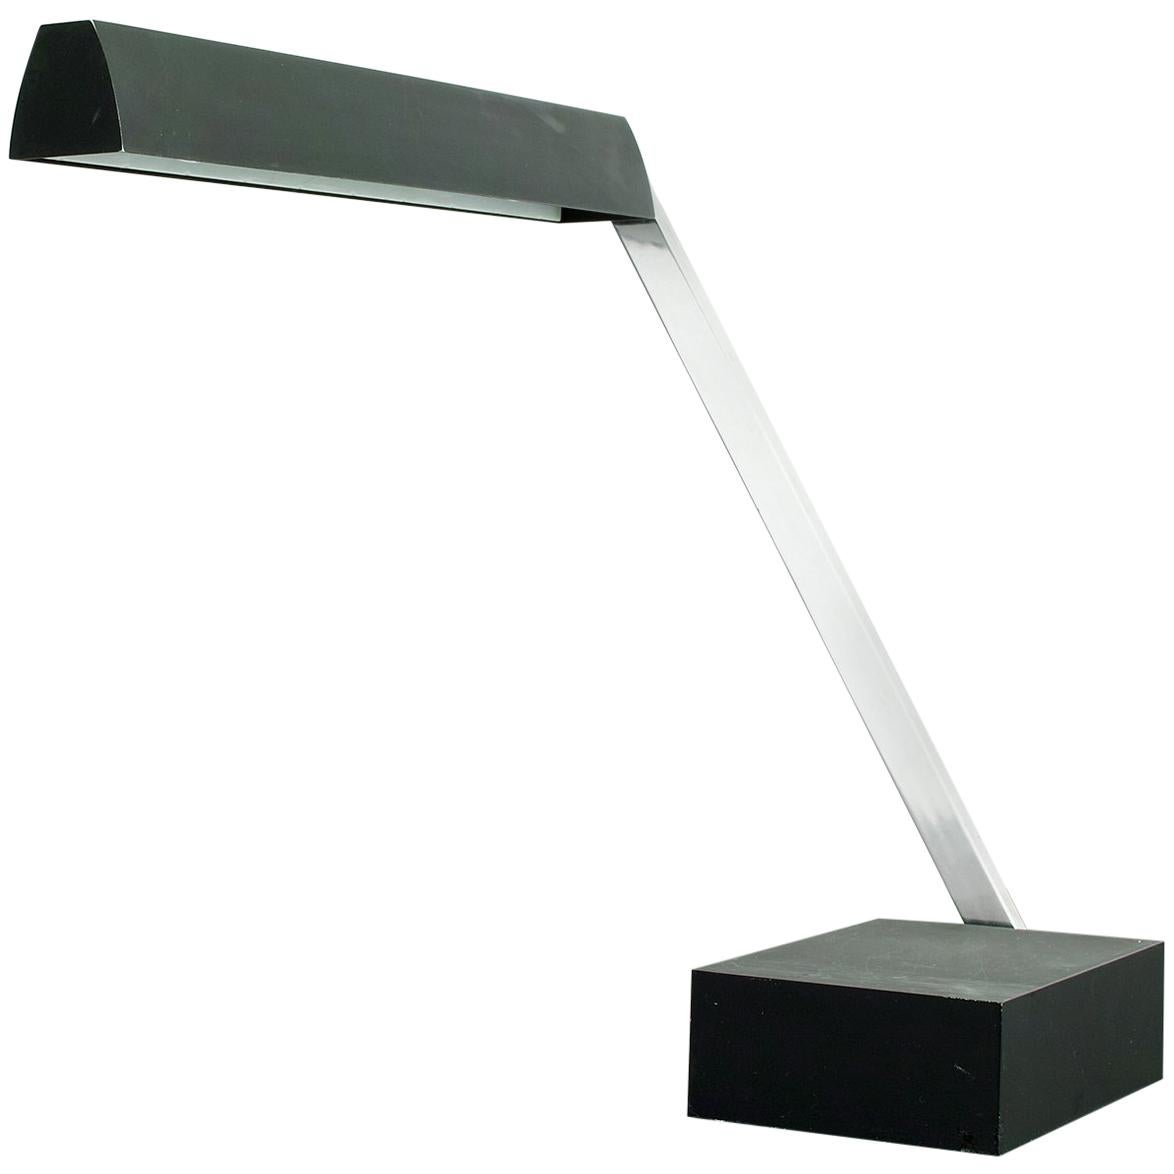 Michael Lax for Lightolier "Baton" Table or Wall Lamp